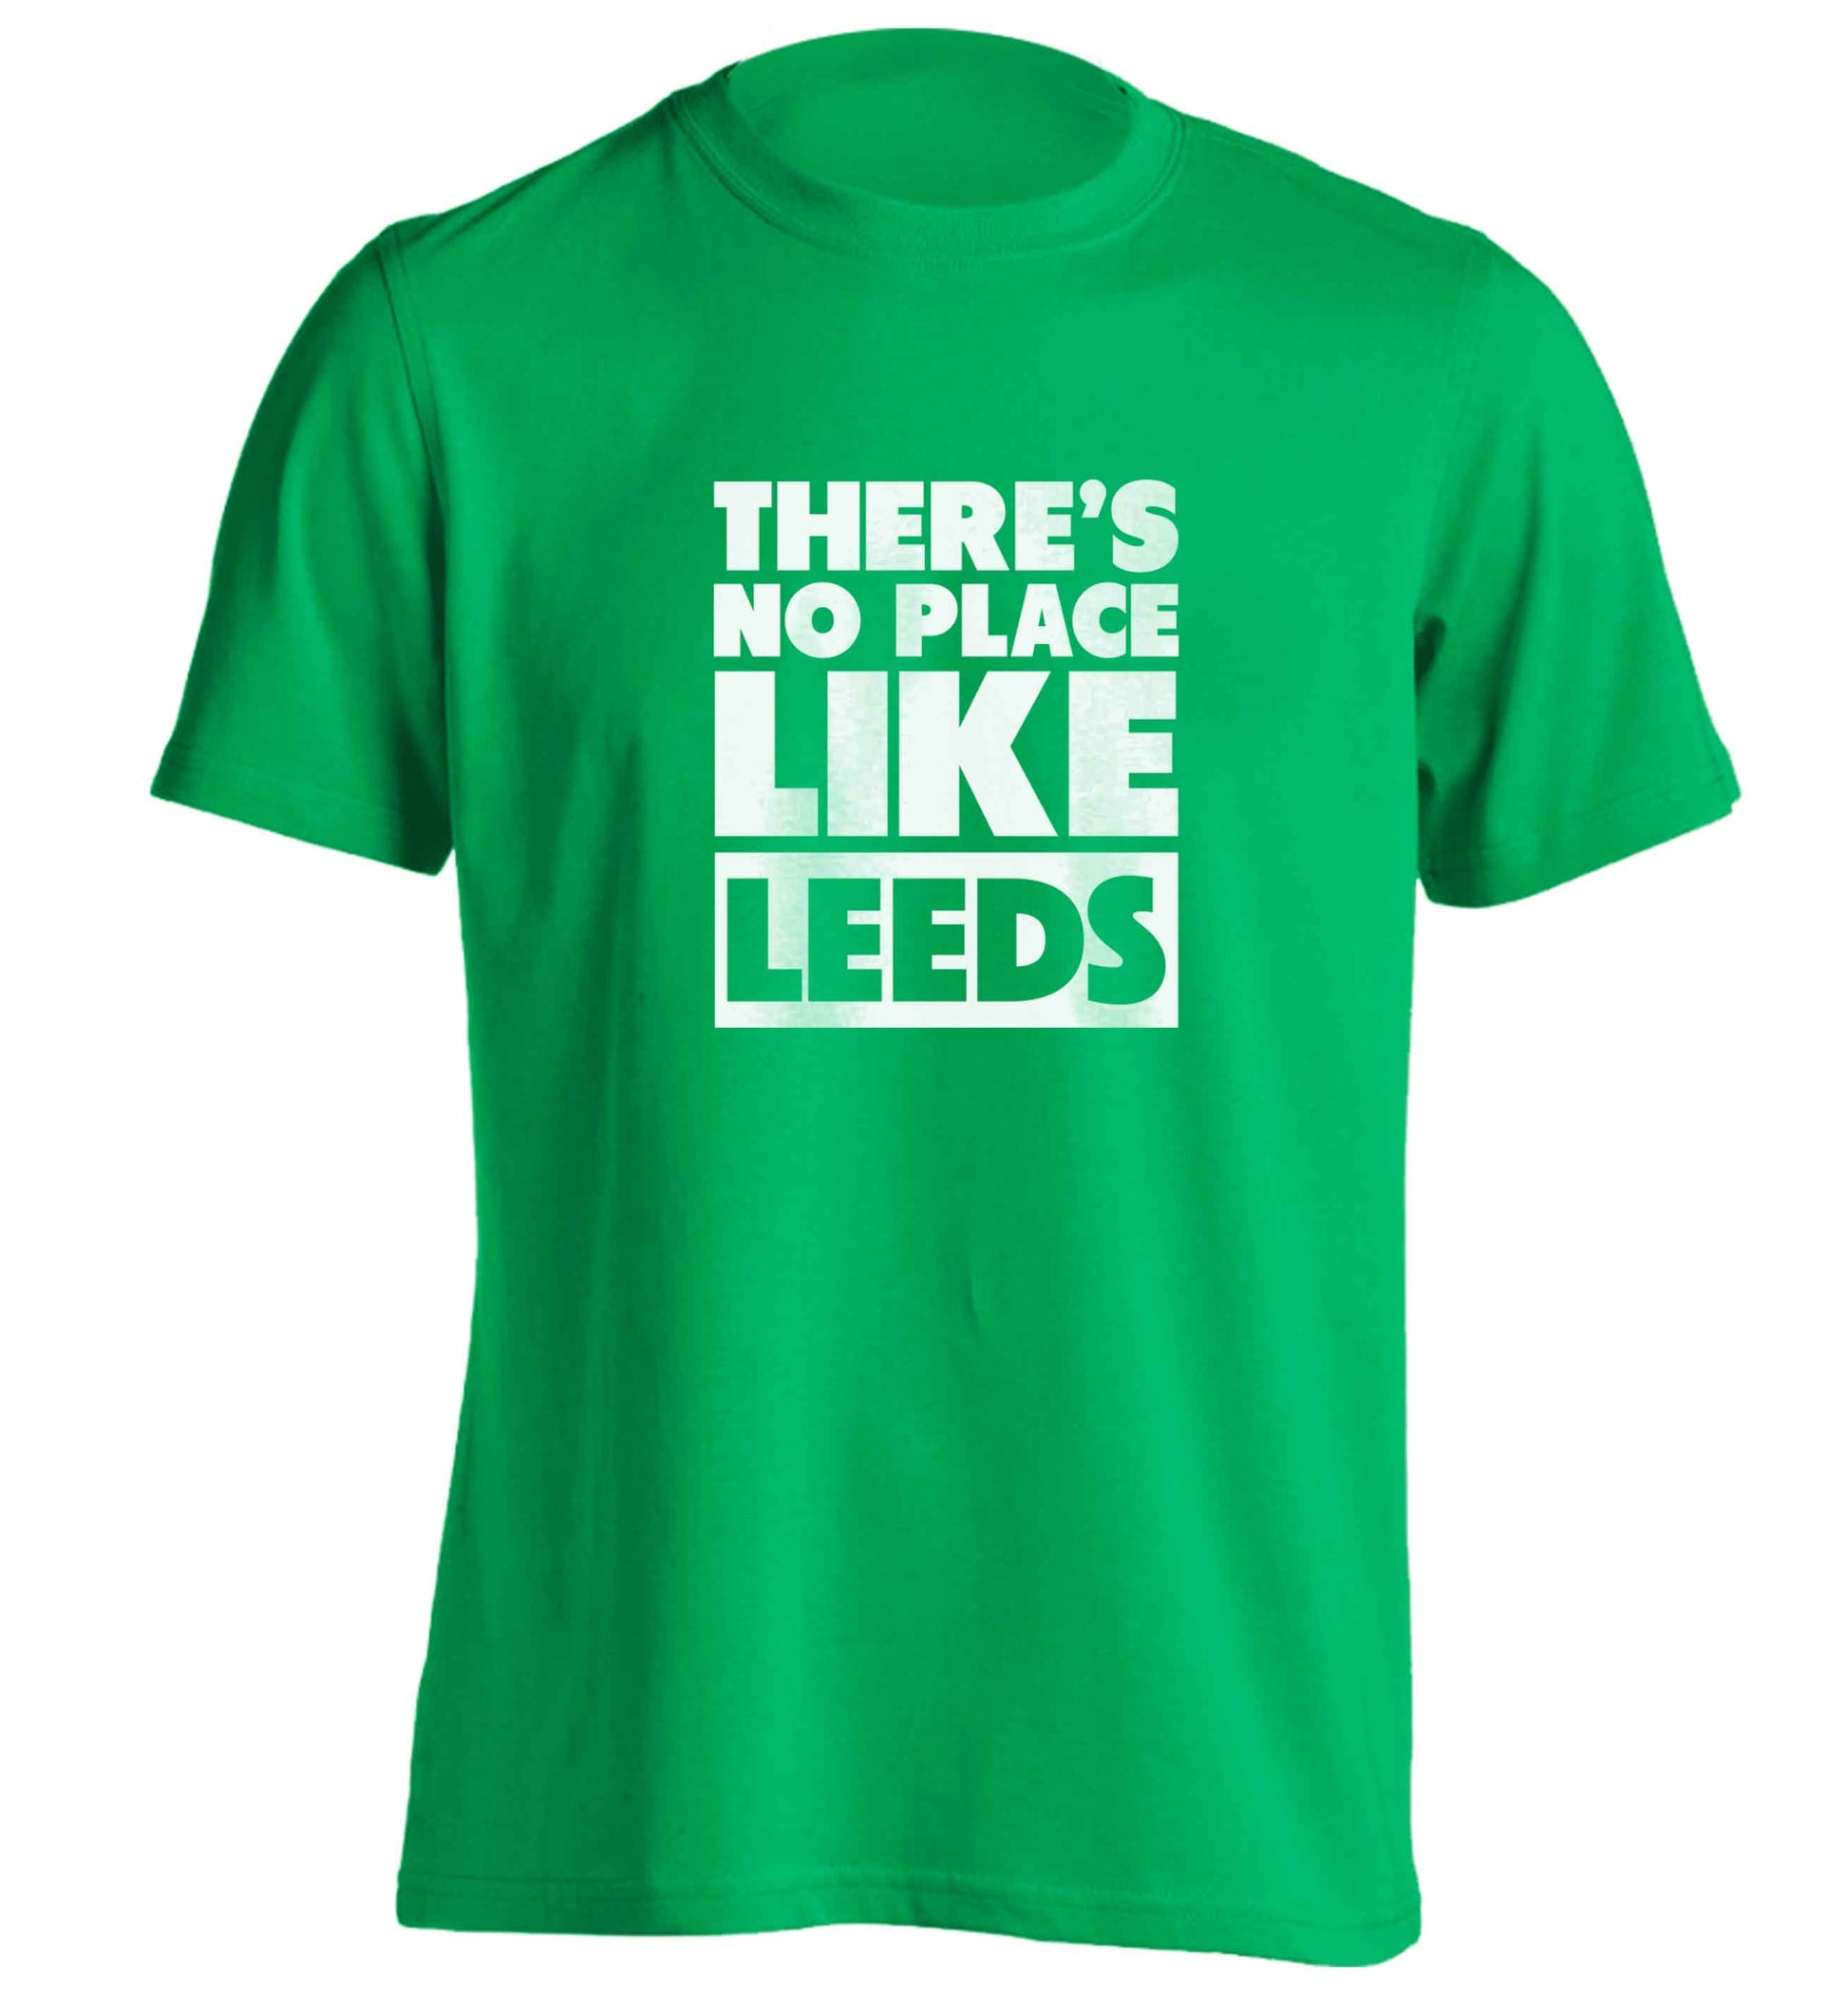 There's no place like Leeds adults unisex green Tshirt 2XL